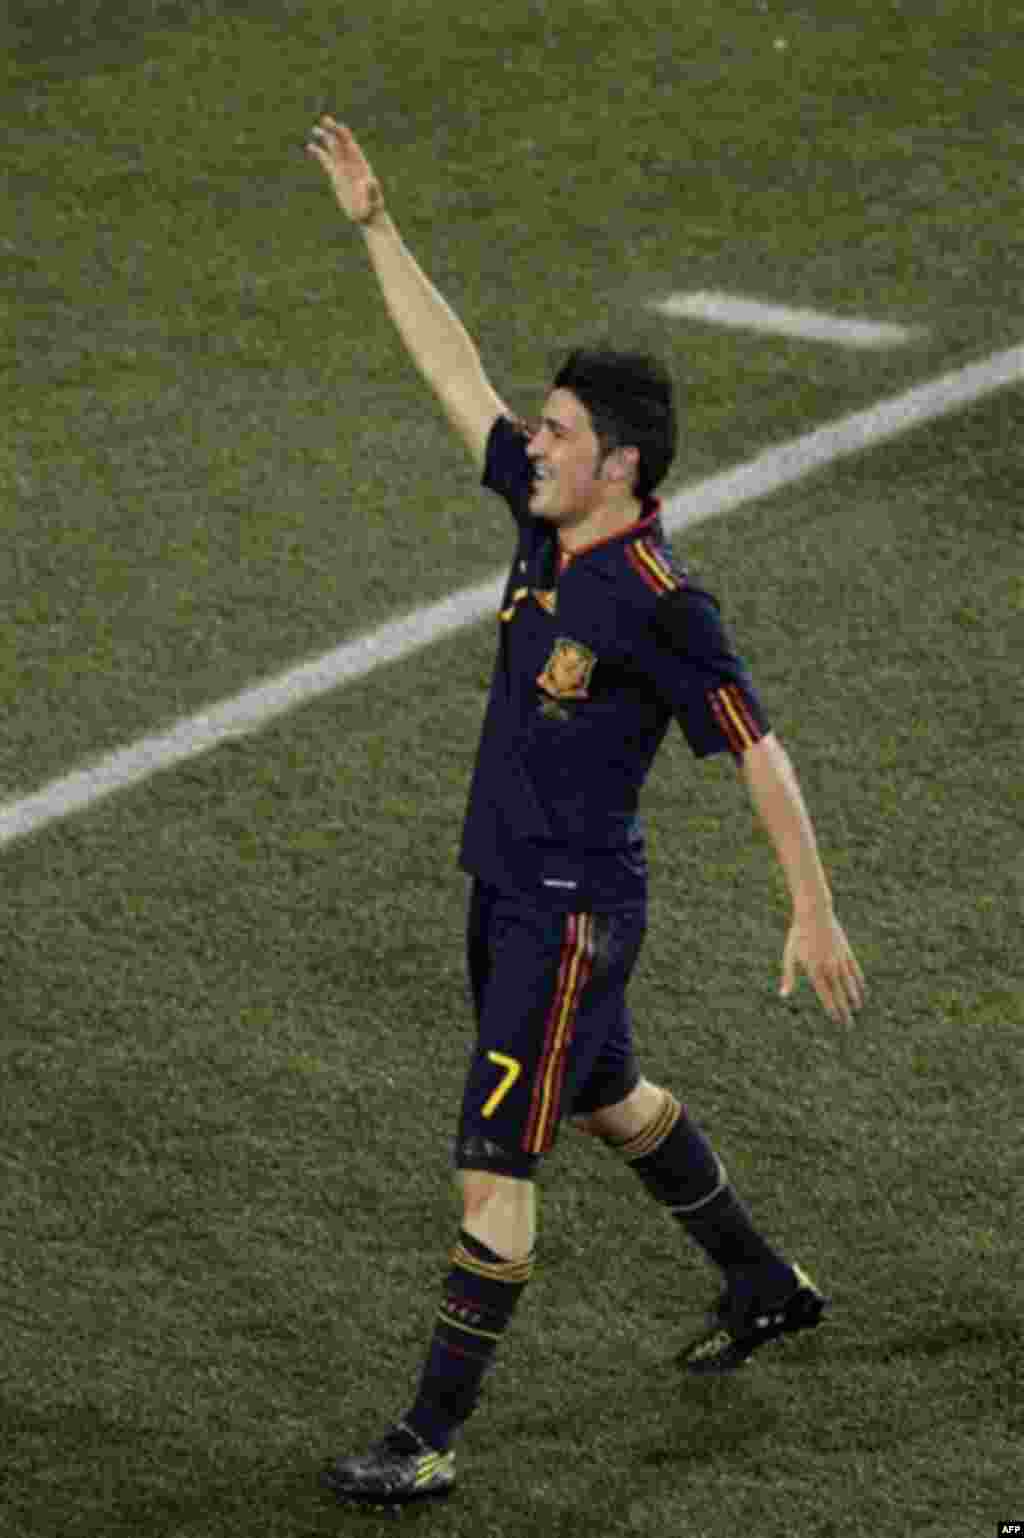 Spain's David Villa celebrates after scoring a goal during the World Cup quarterfinal soccer match between Paraguay and Spain at Ellis Park Stadium in Johannesburg, South Africa, Saturday, July 3, 2010. Spain won 1-0. (AP Photo/Themba Hadebe)